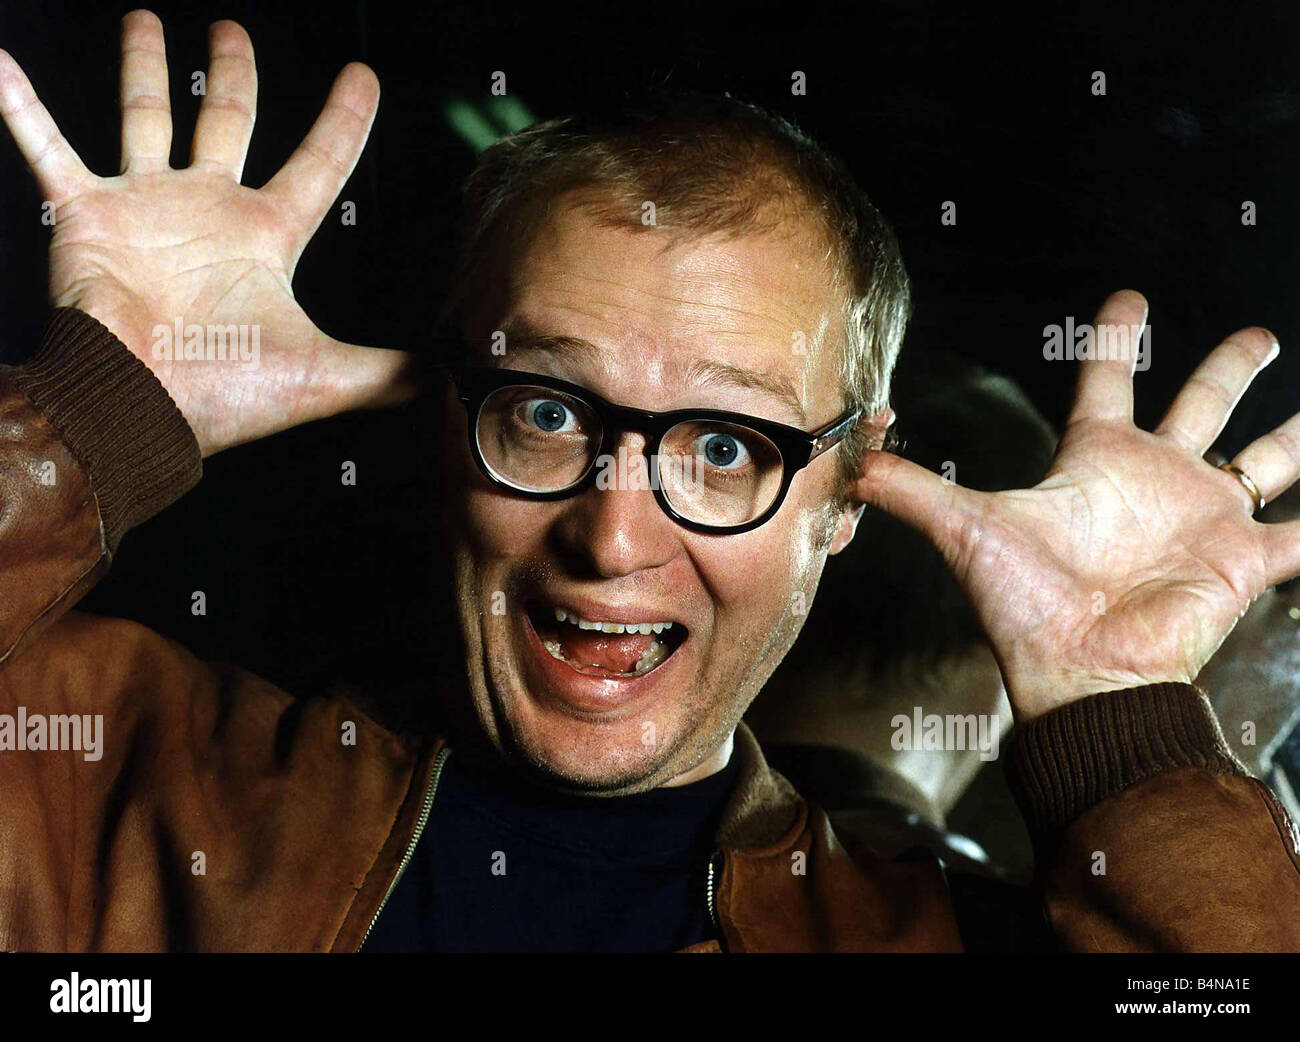 Adrian Edmondson Actor Comedian pulling a silly face September 1991 Stock Photo